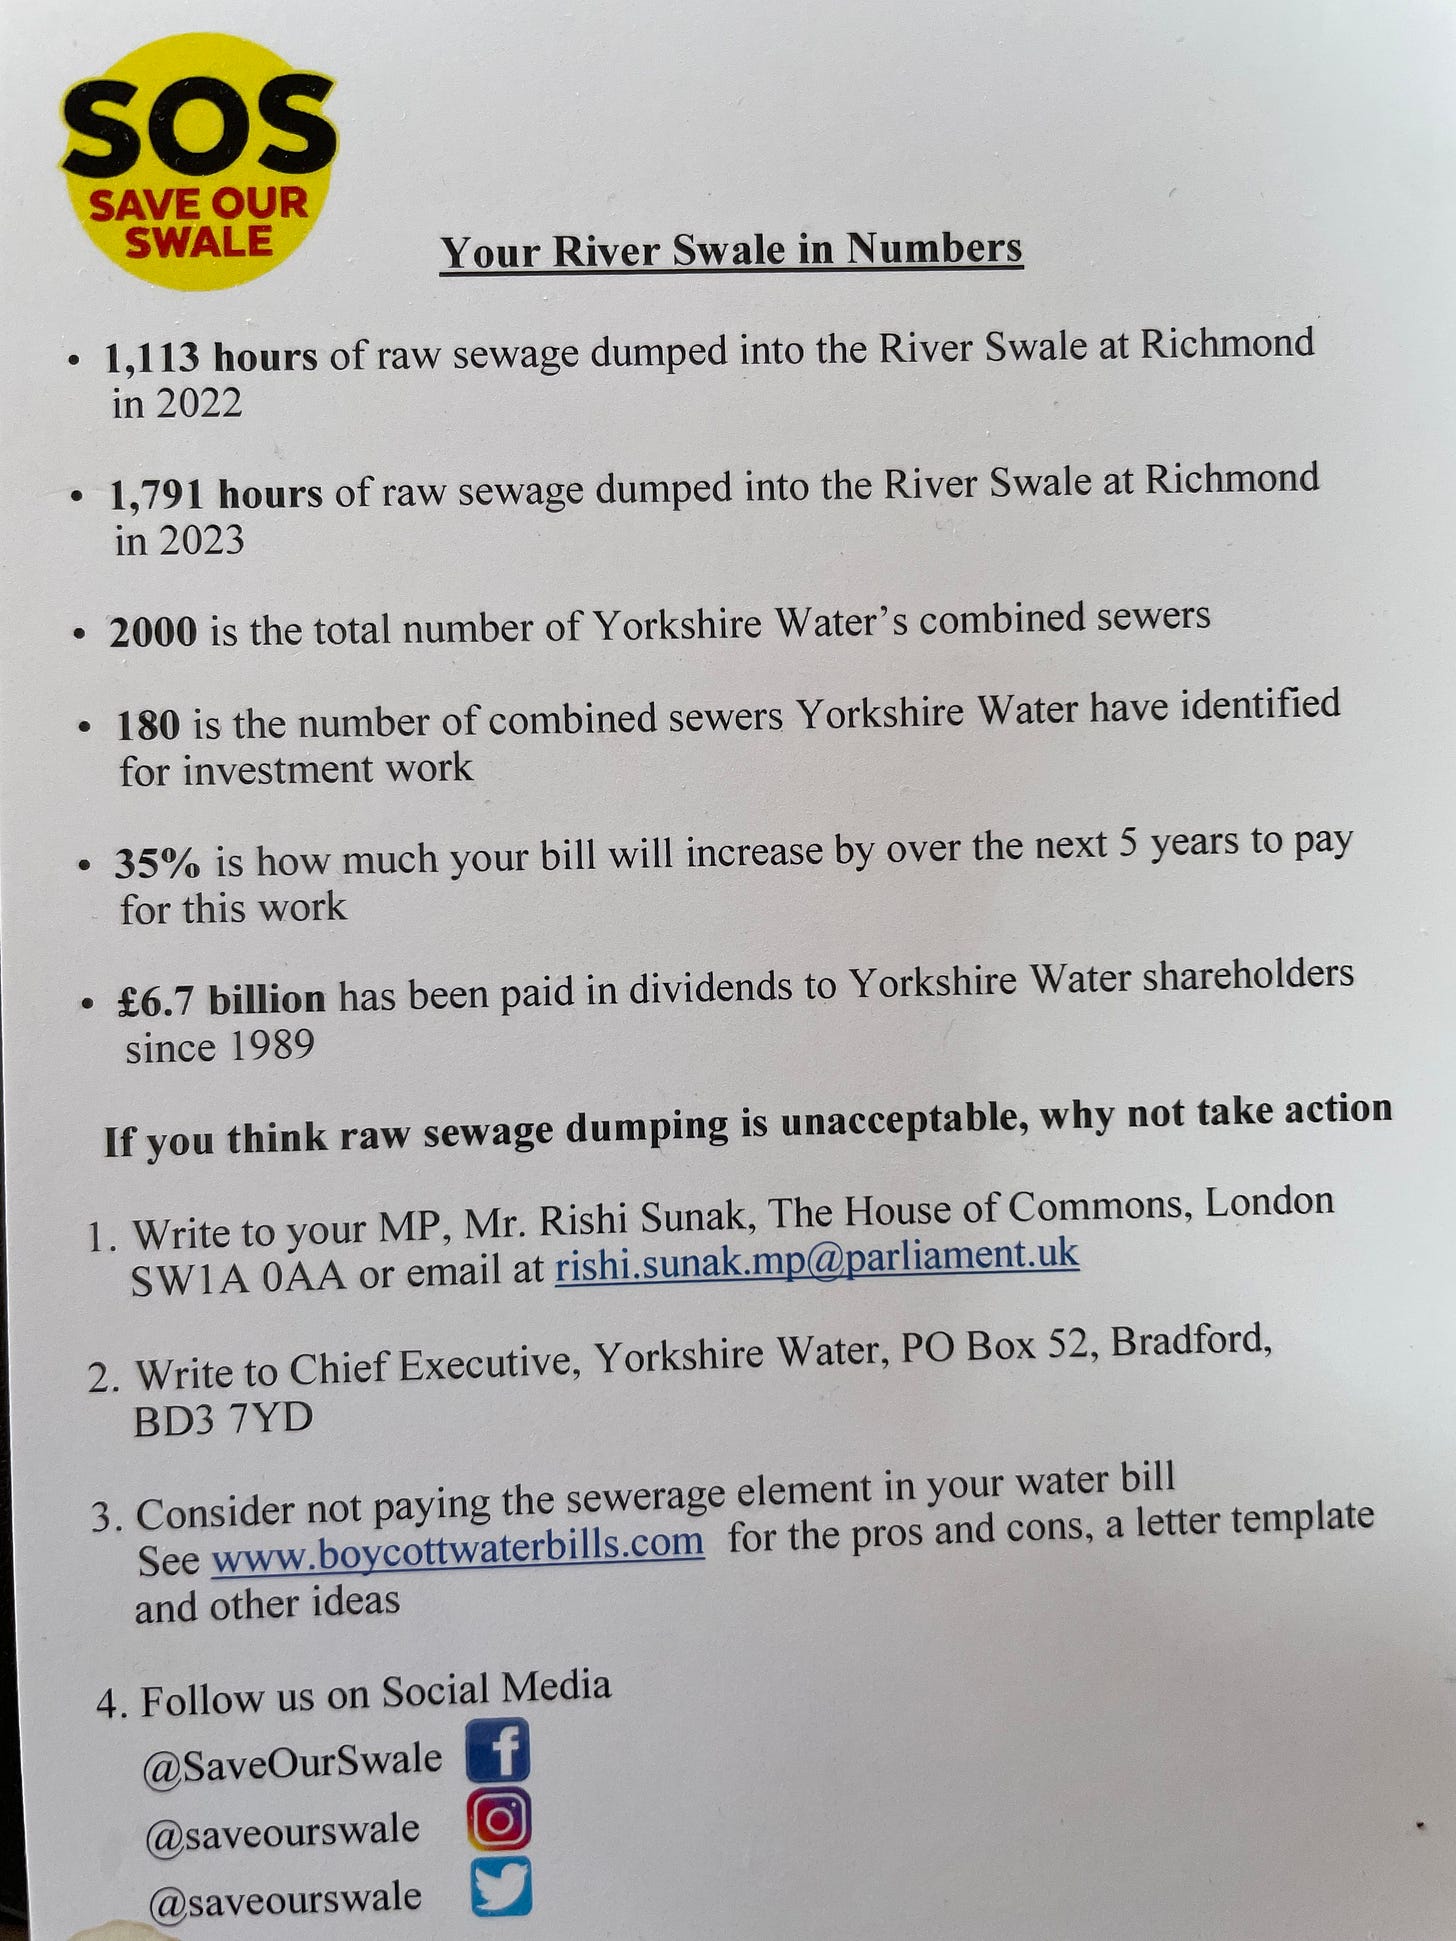 the text of a campaign leaflet with numbers relating to sewage pollution